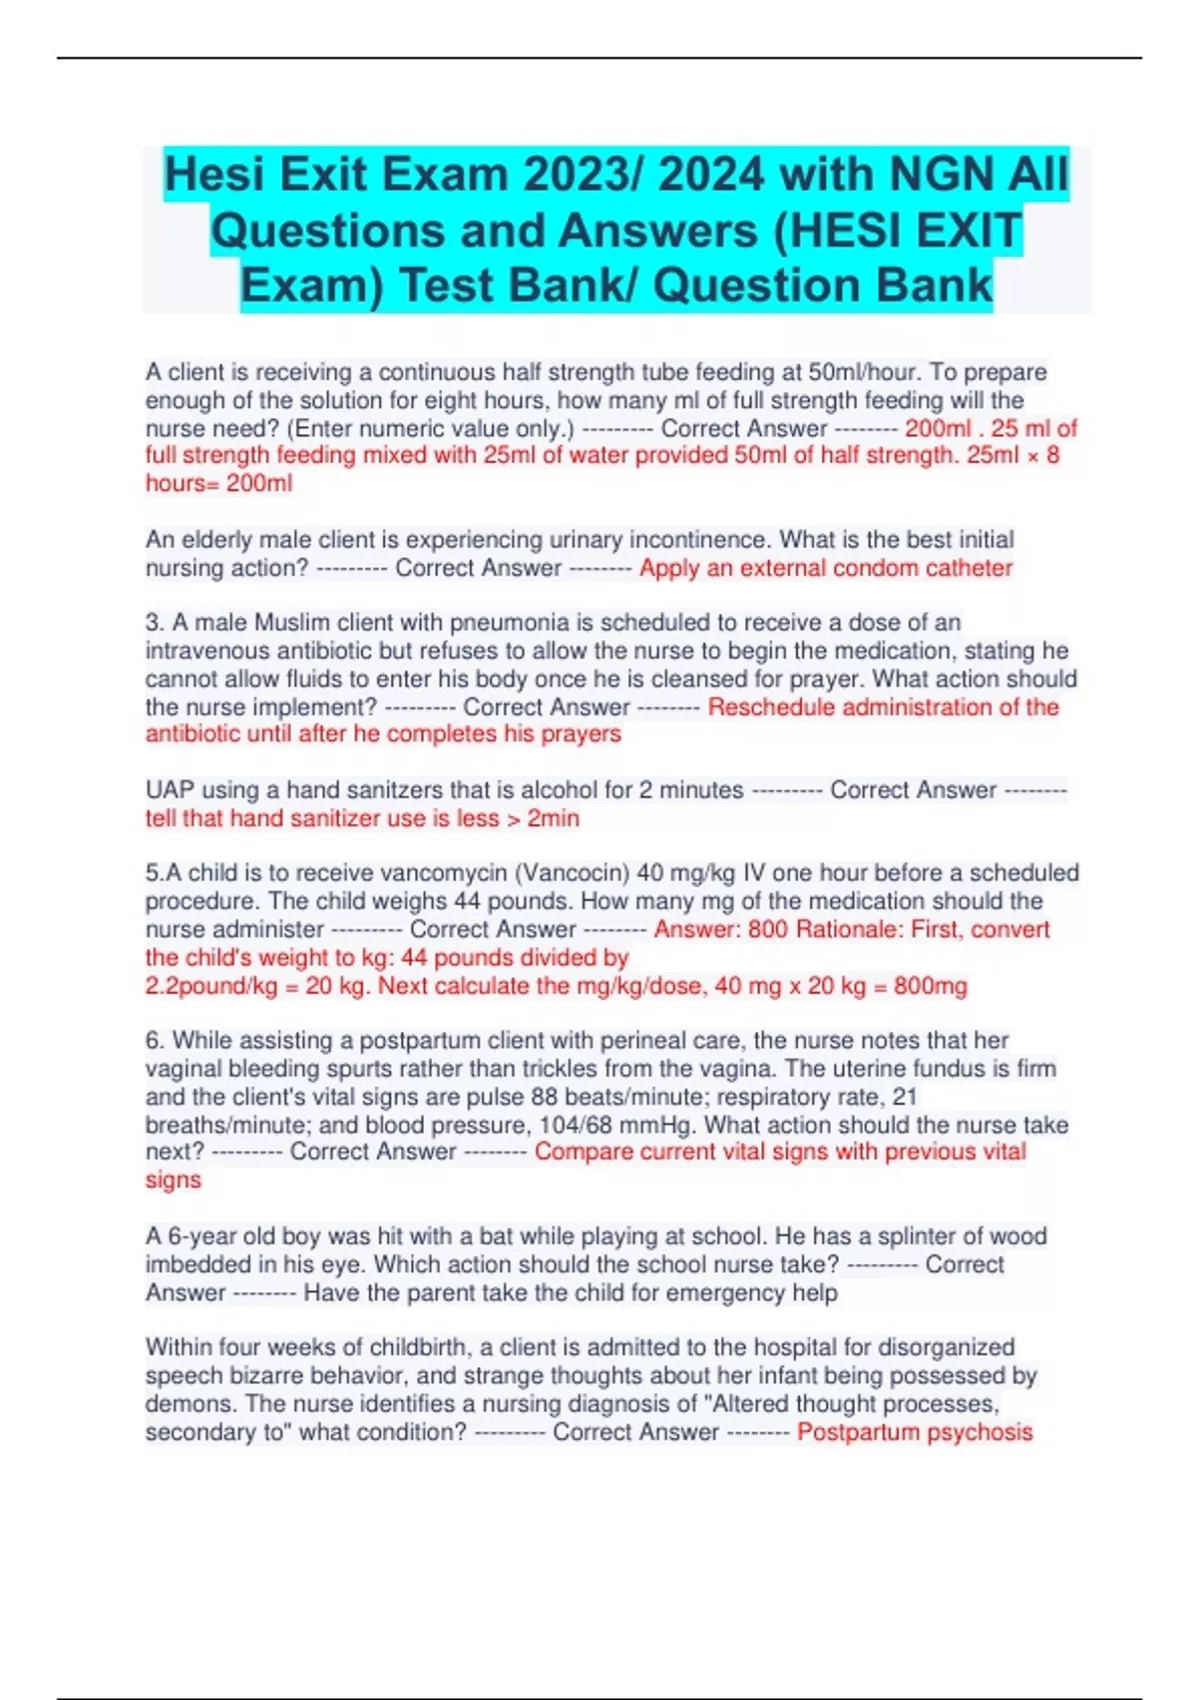 Hesi Exit Exam 2023/ 2024 with NGN All Questions and Answers (HESI EXIT